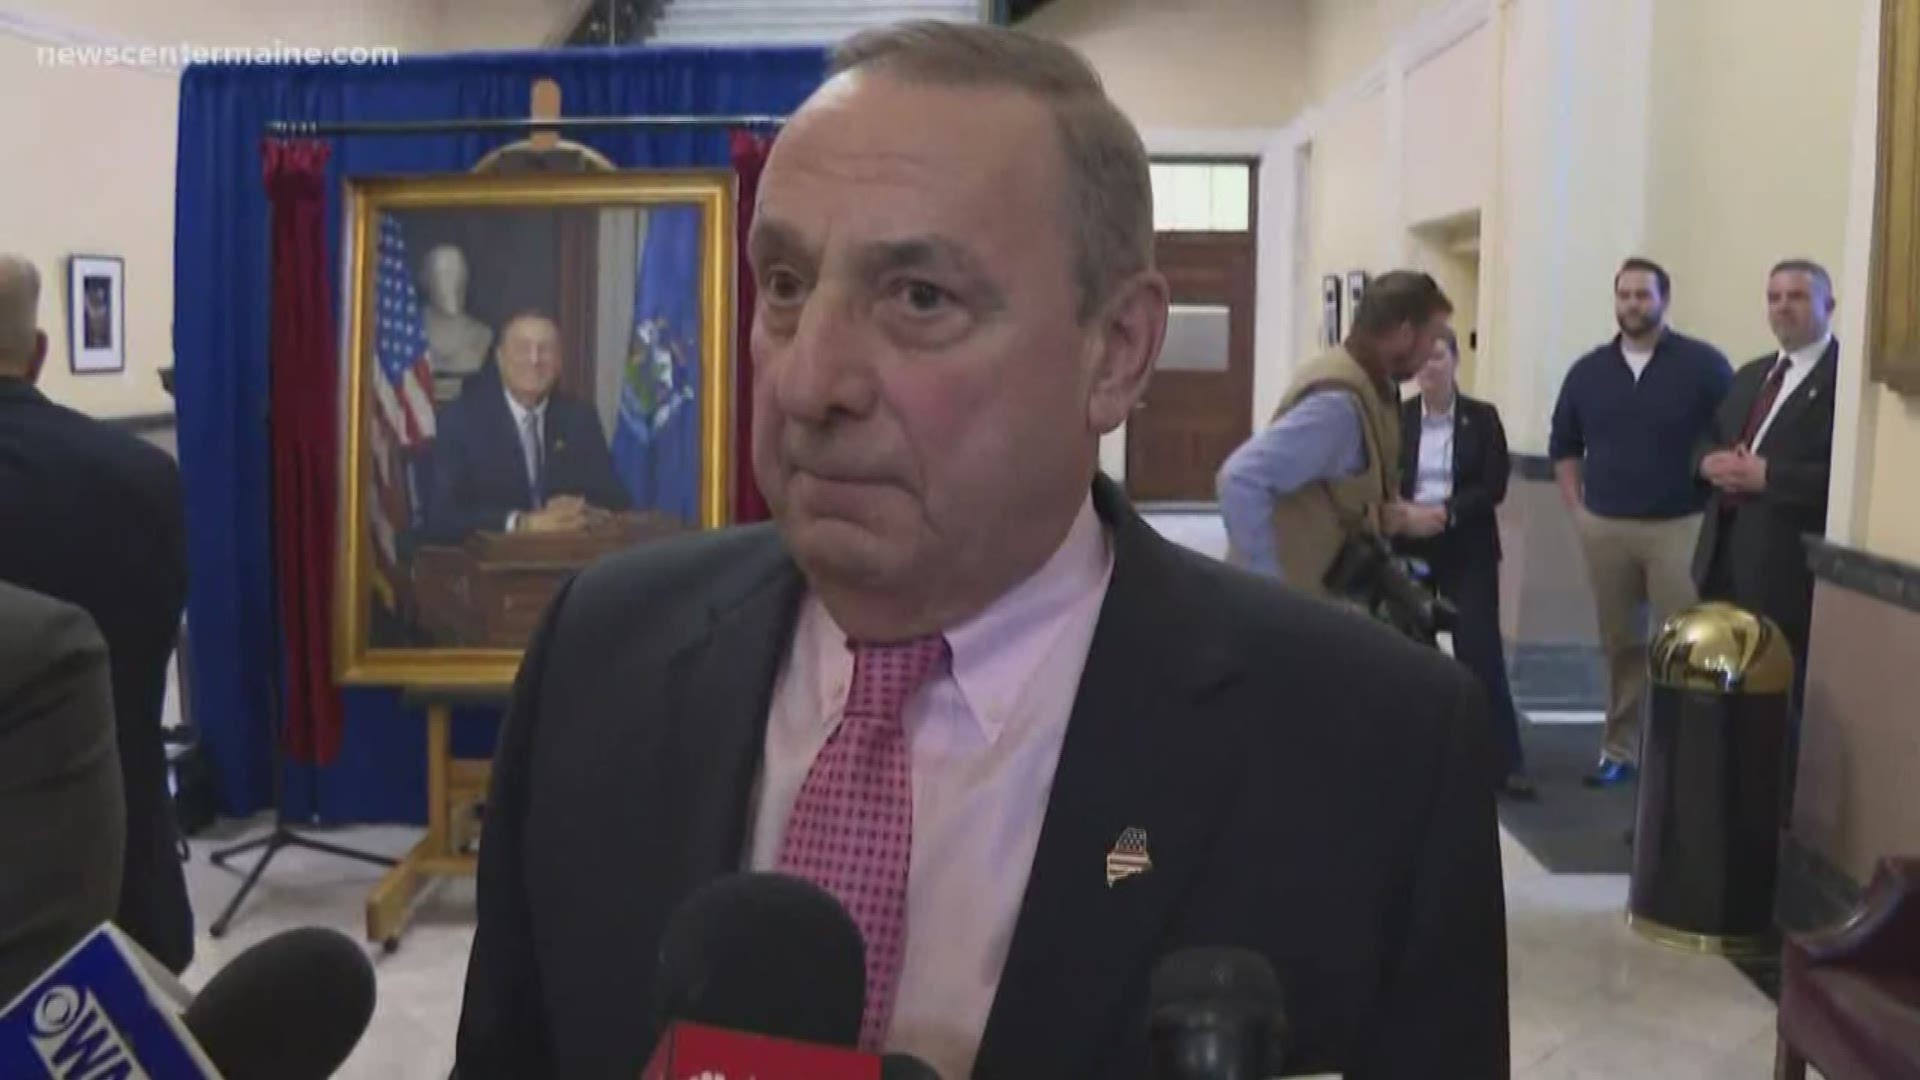 The race for Maine's second district was shaken-up this week with the entry of a new candidate who carries the coveted endorsement of former Gov. Paul LePage